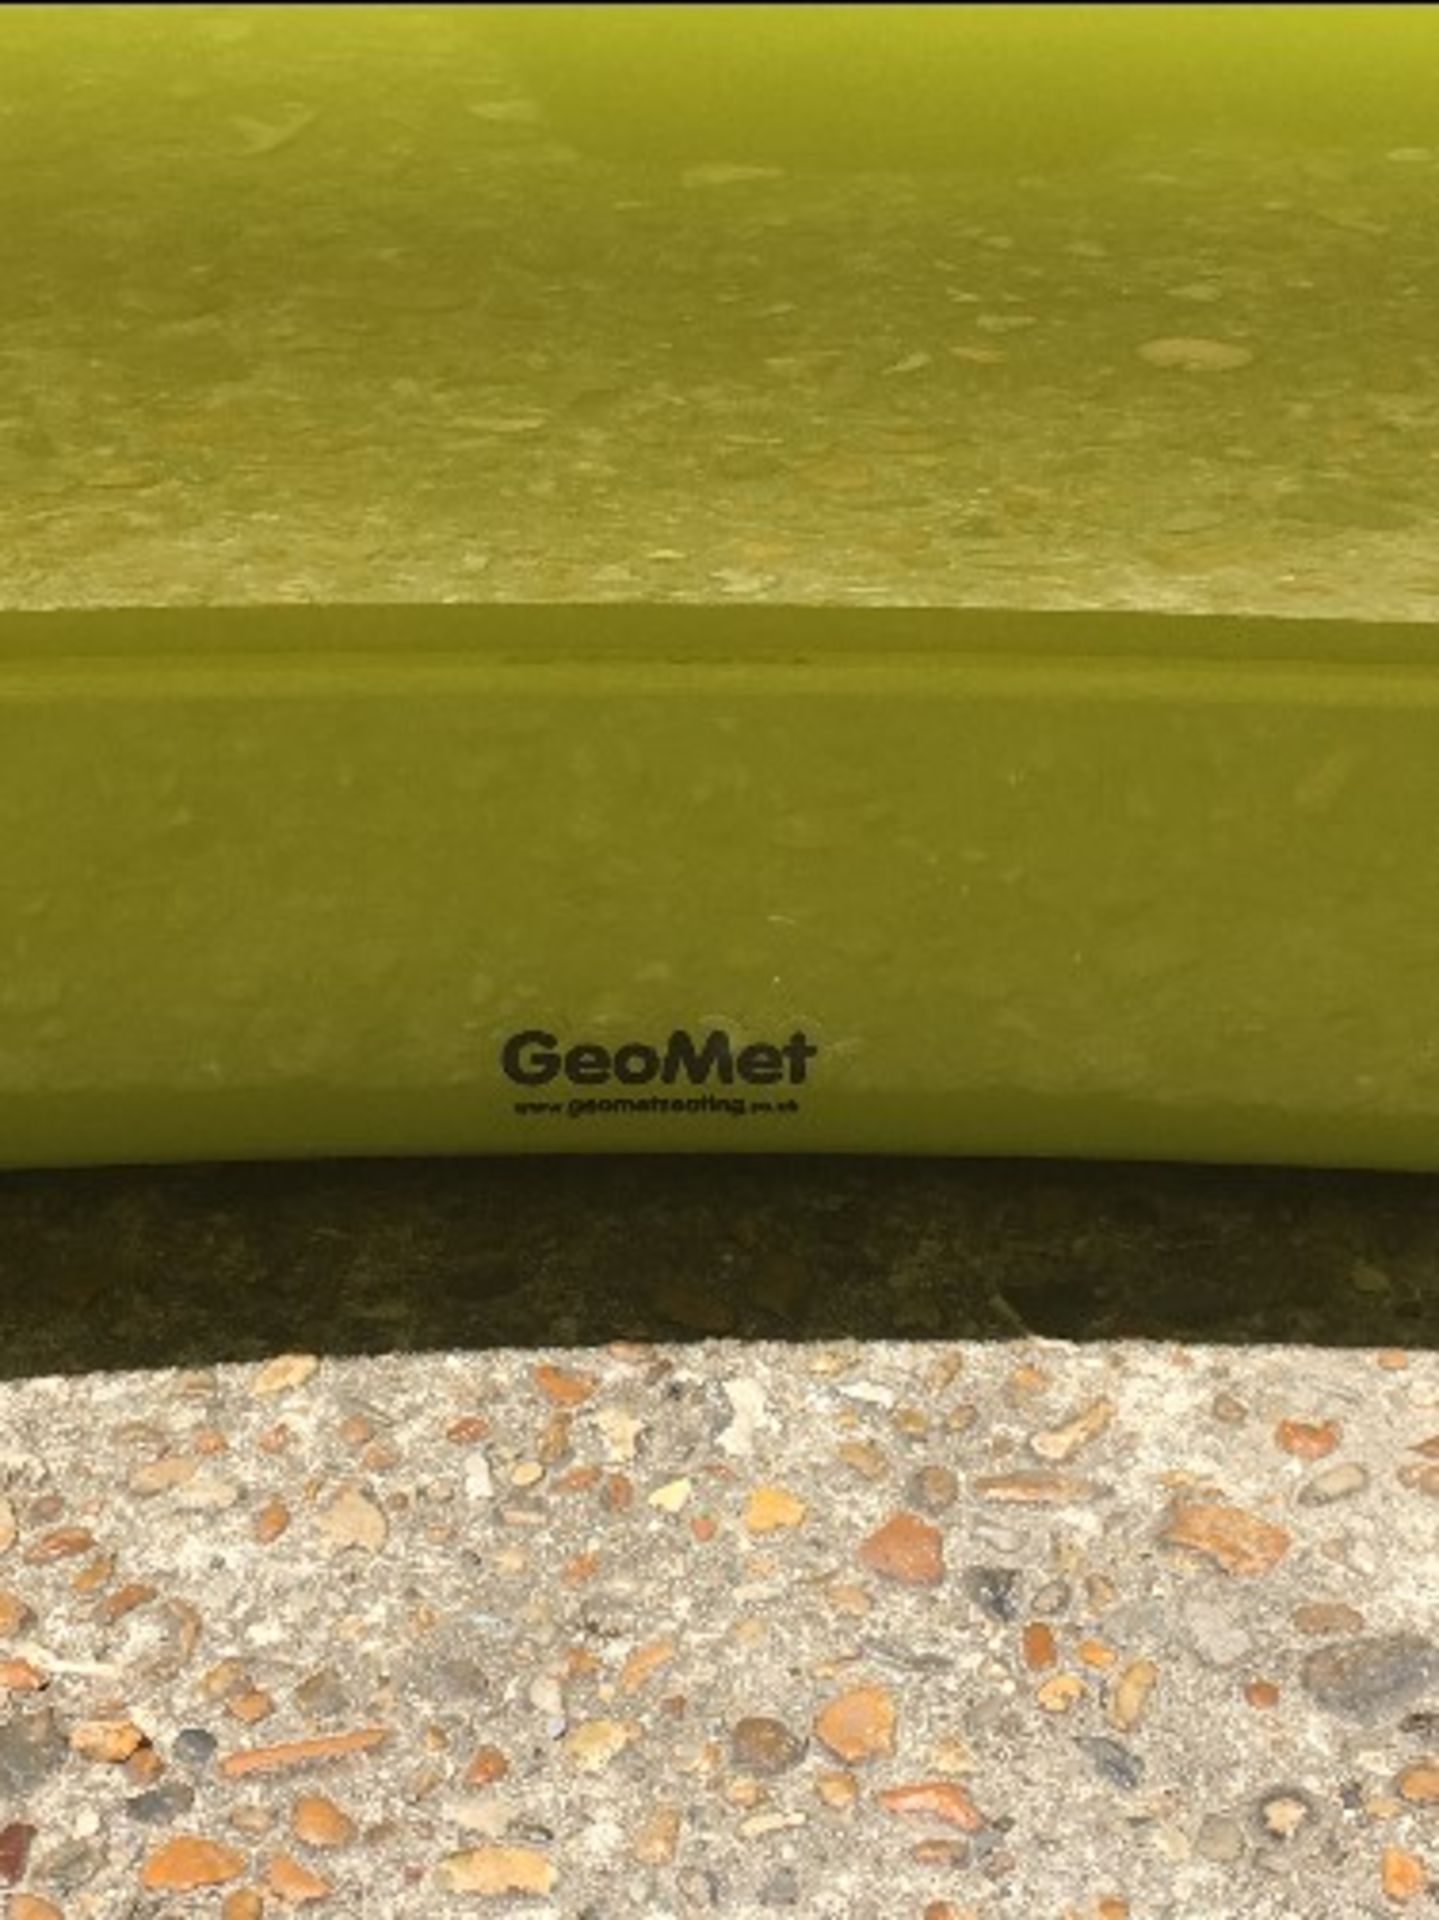 Geomet Morph Curved Bench Seat - Image 4 of 4